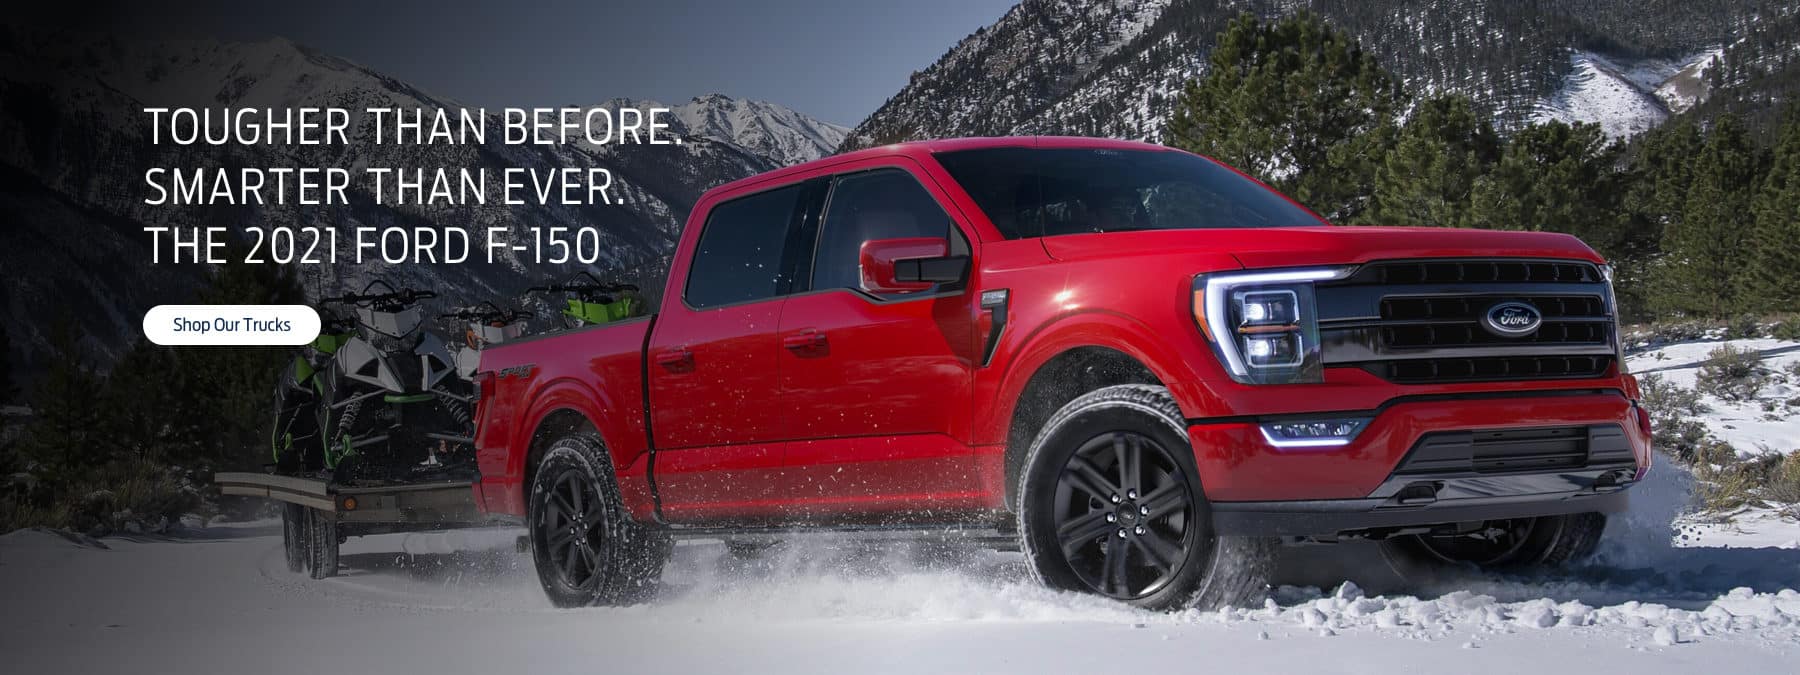 Red Ford F-150 in snow